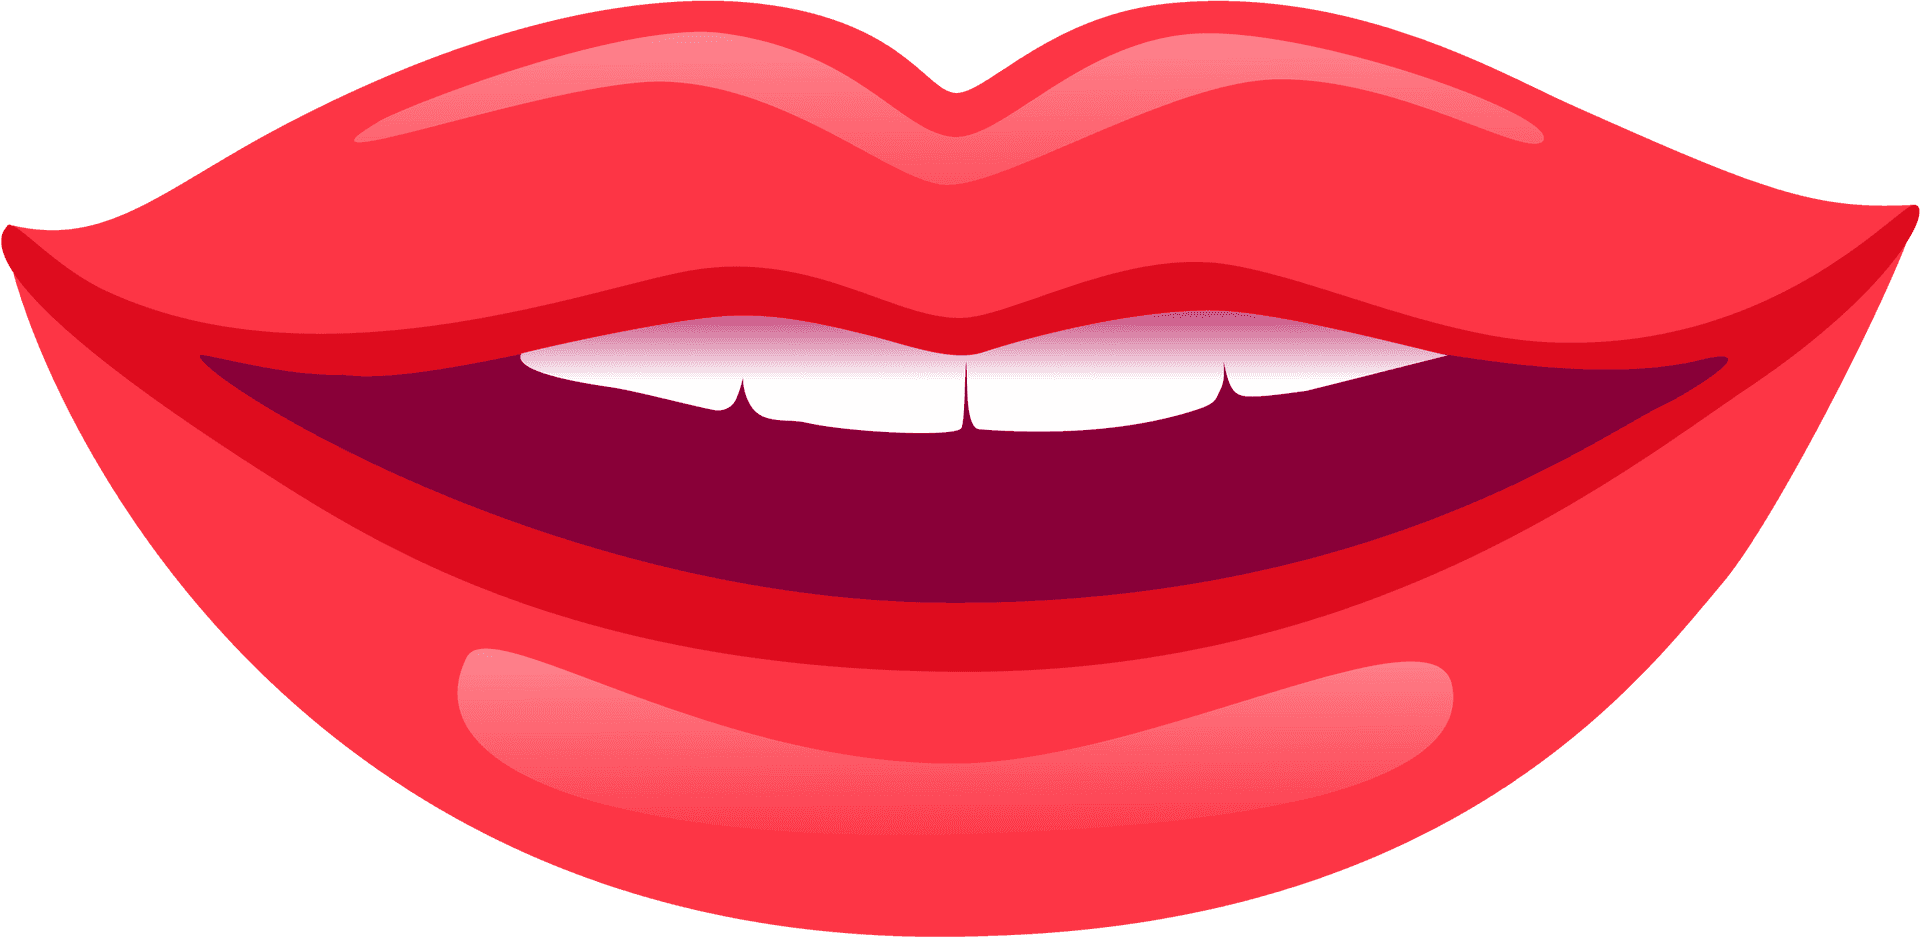 Red Lipstick Smiling Mouth Illustration PNG